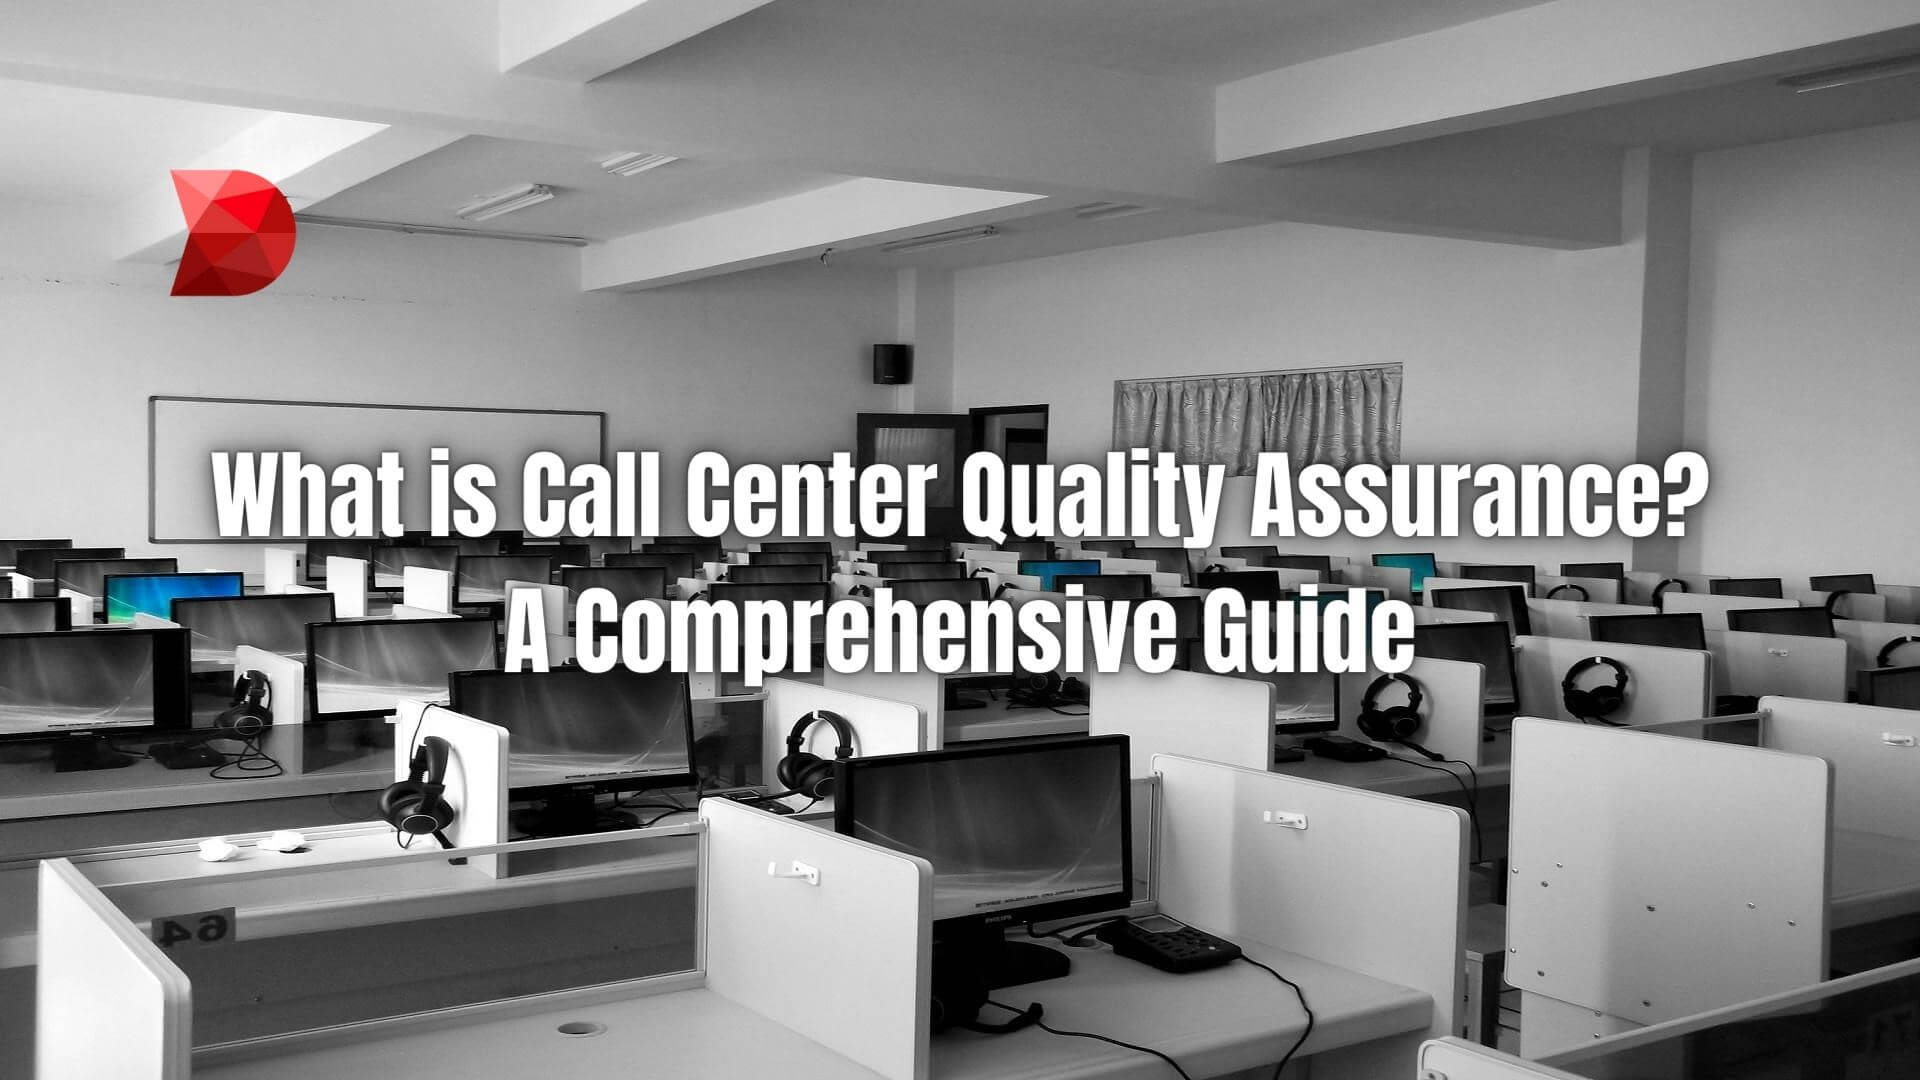 Unlock the secrets of call center quality assurance. Learn more about the strategies, tips, and best practices for optimizing performance.